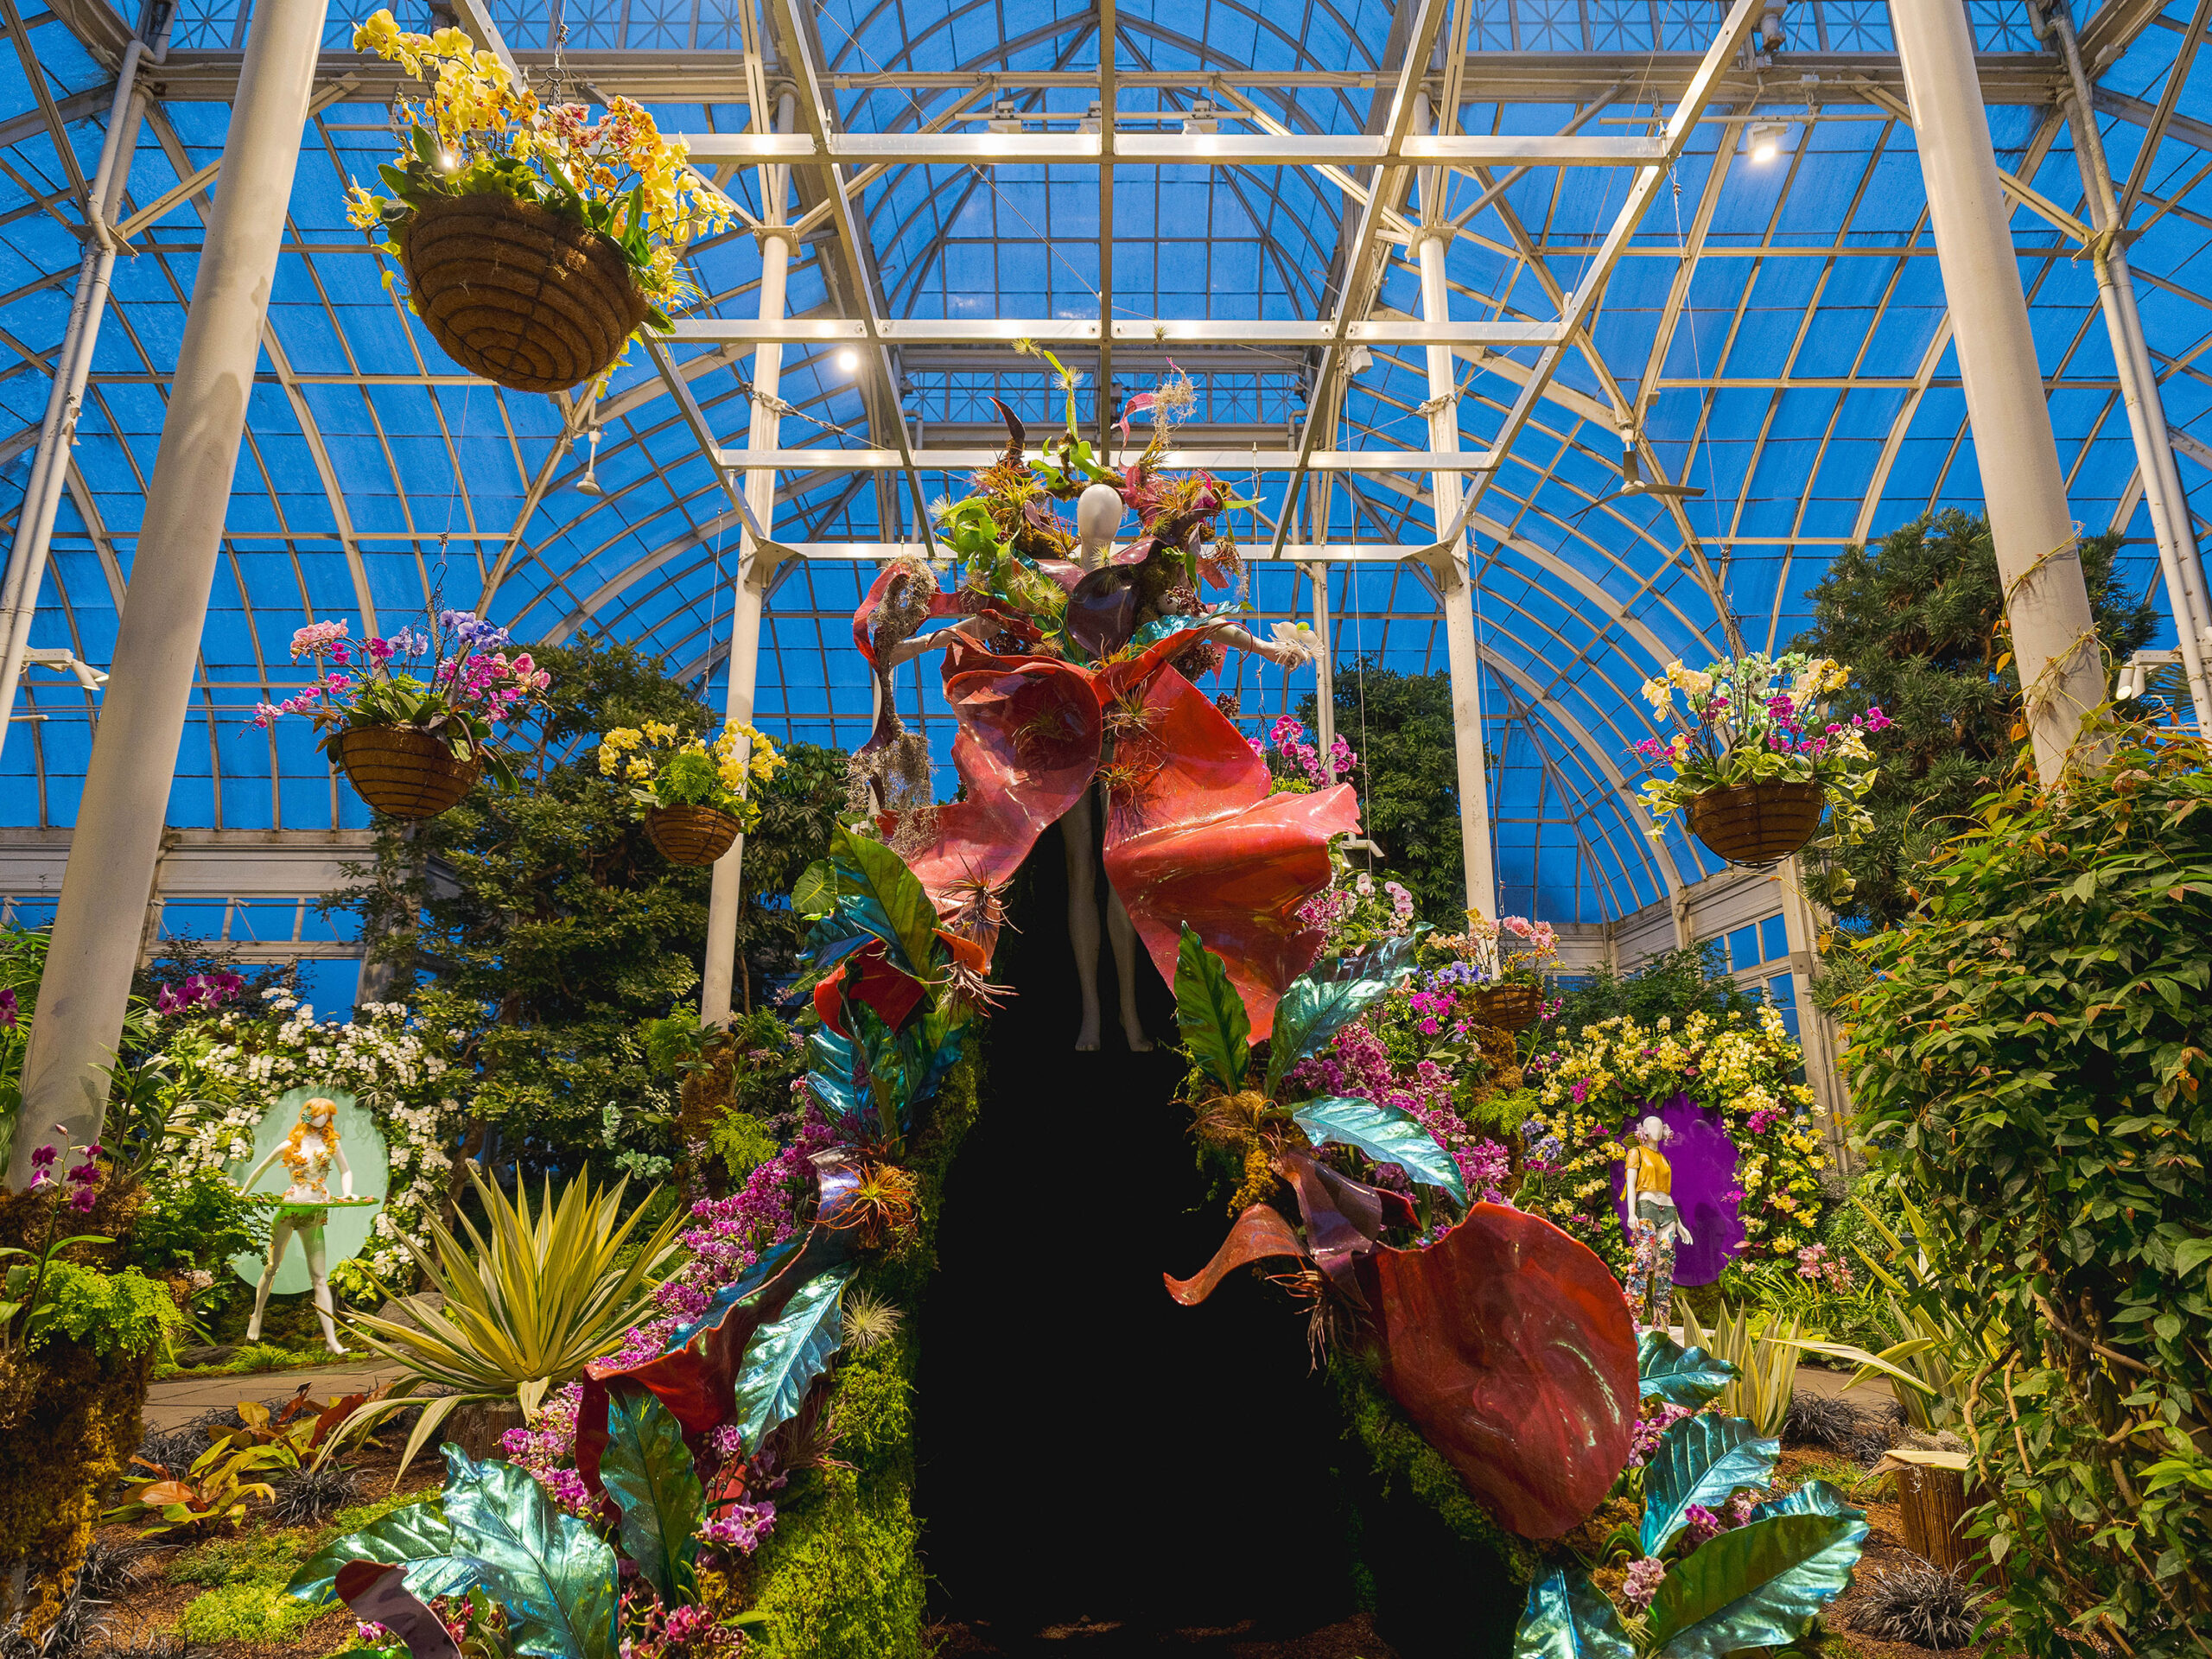 An evening view of an elaborate flower exhibition after dark, featuring mannequins covered in colorful blooms